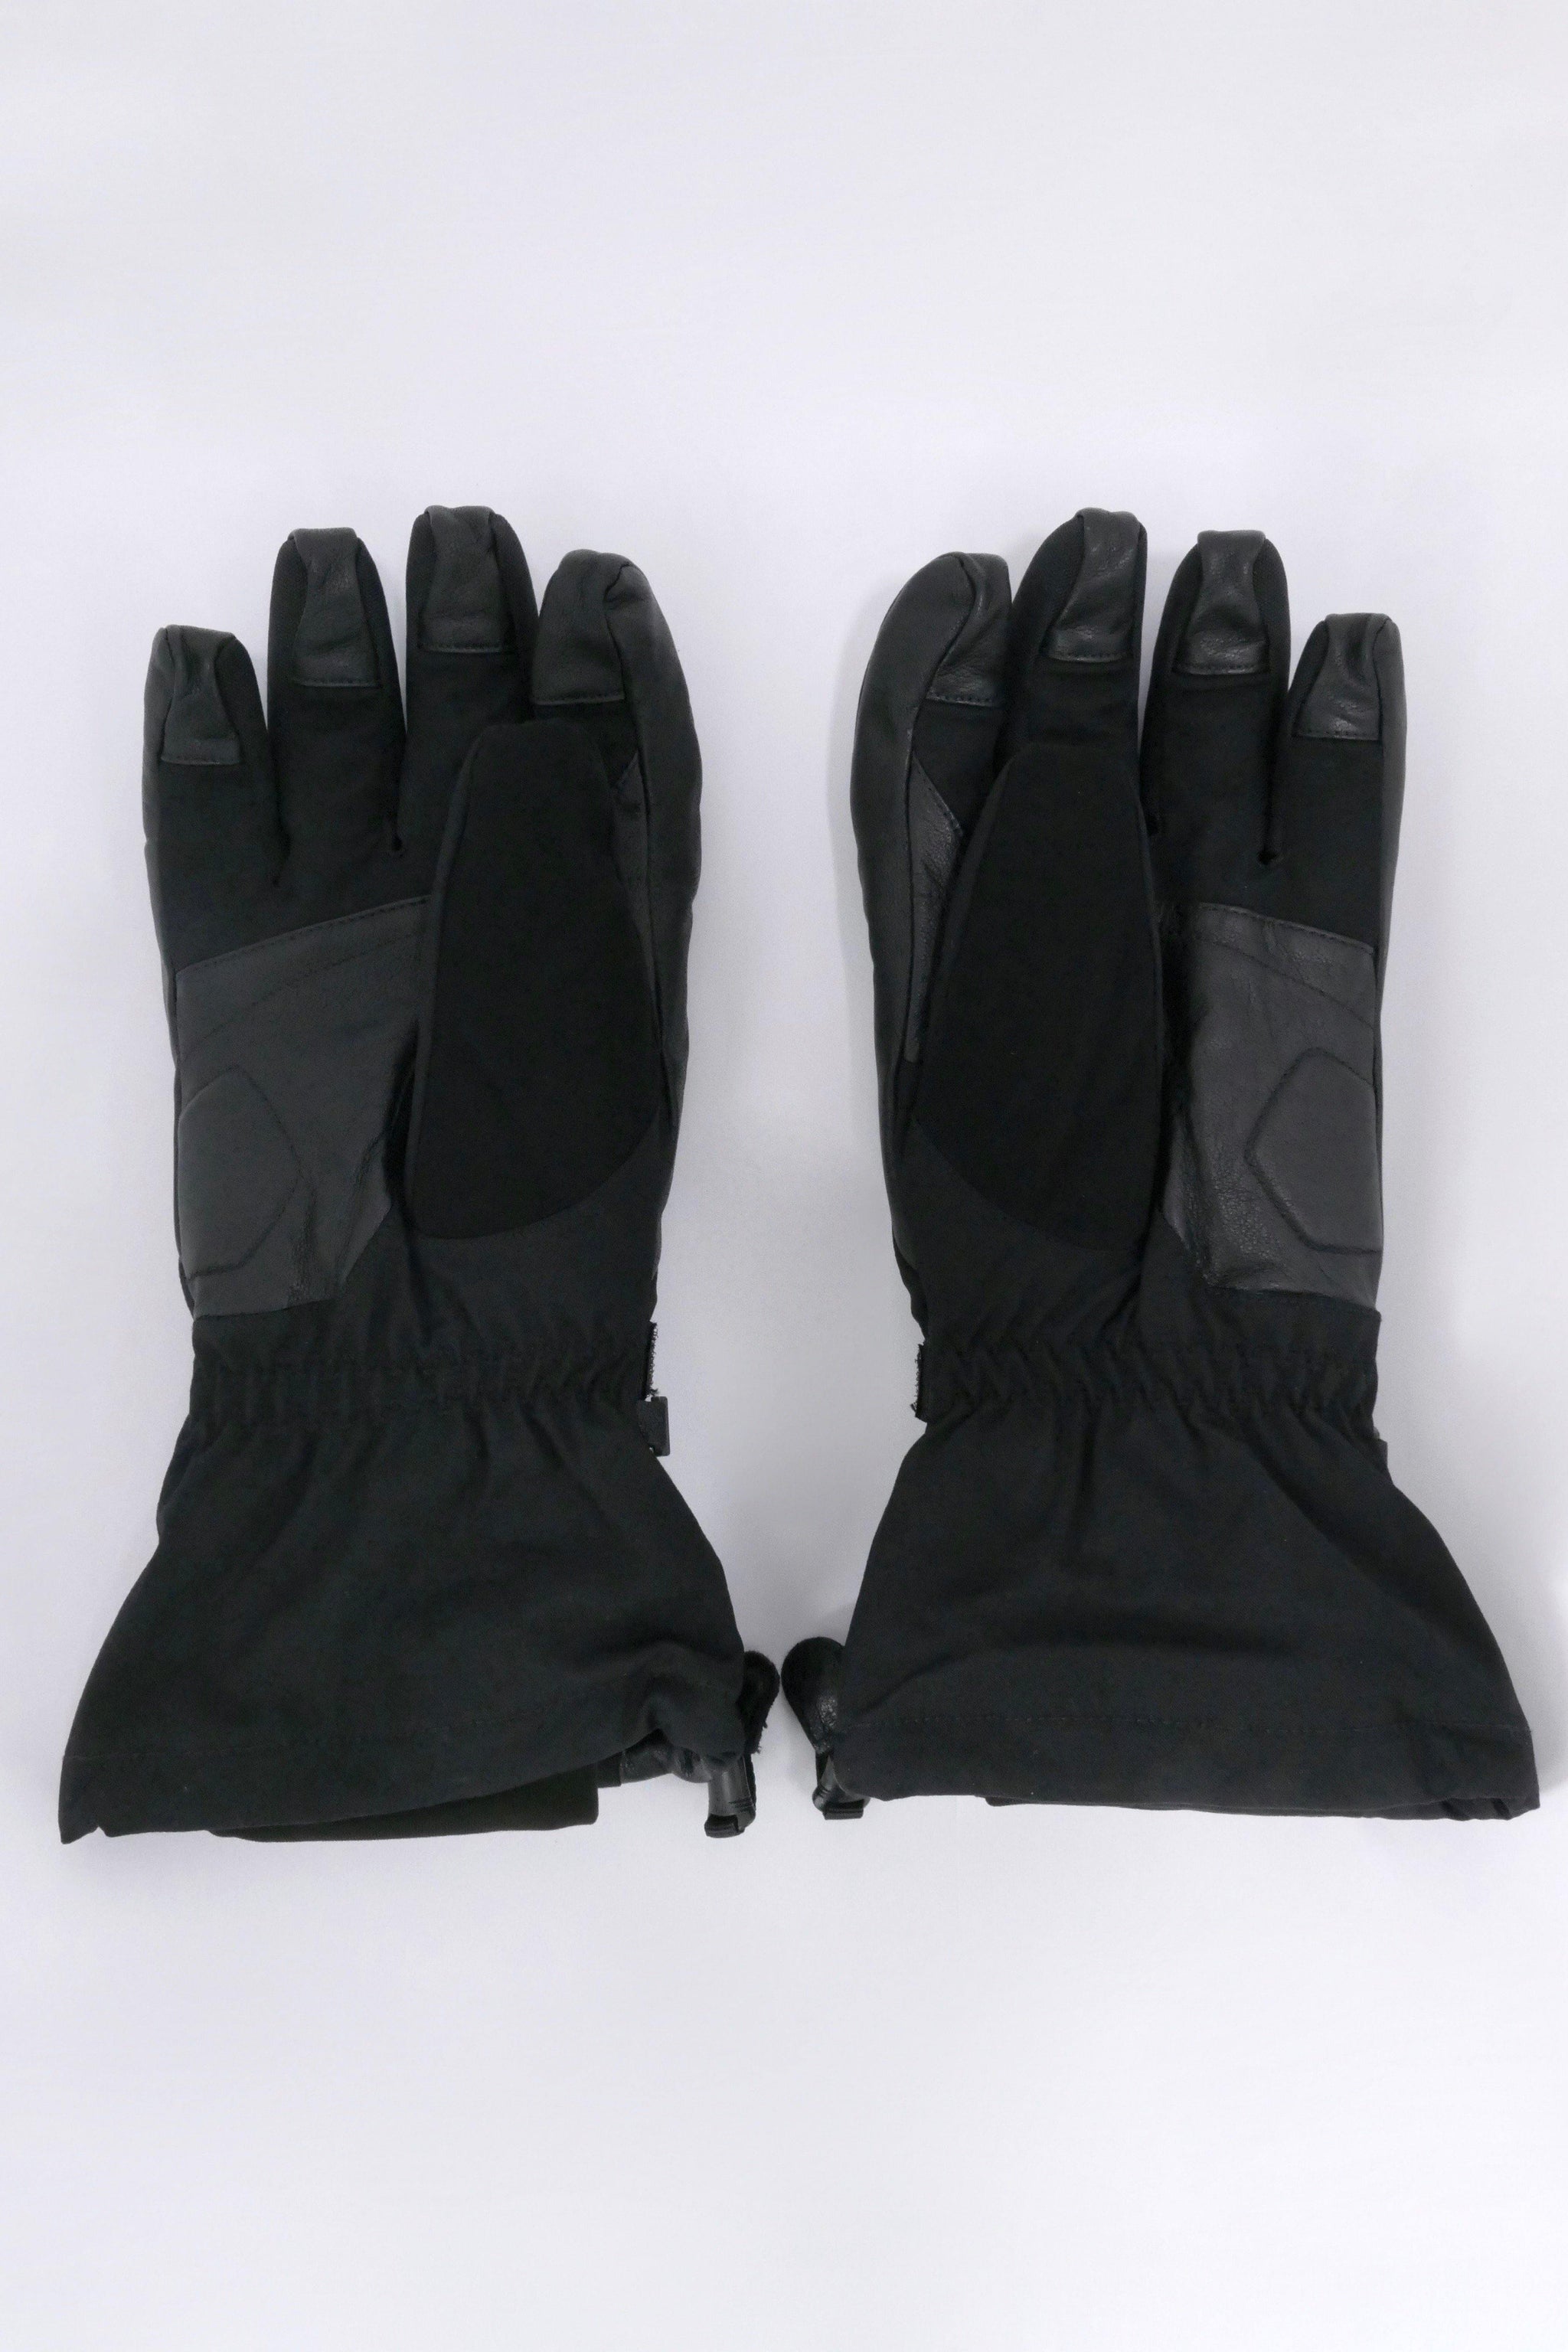 Canada Goose Mens Winter Accessories Gloves & Mitts Northern